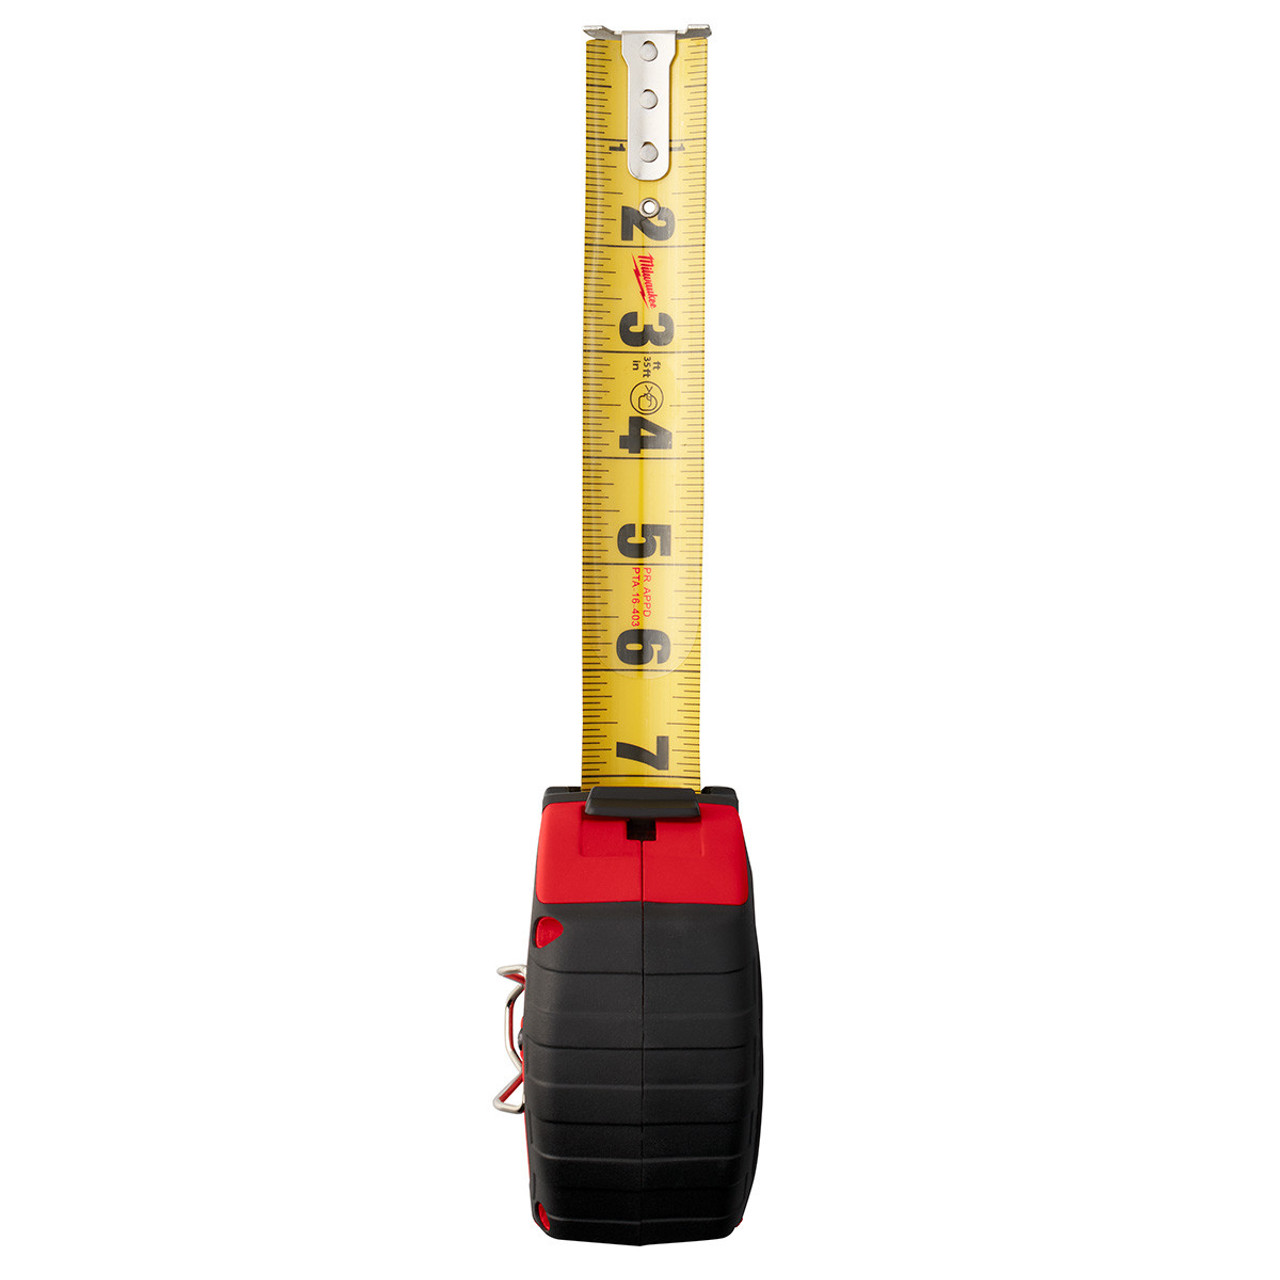 Milwaukee 35 Ft. Compact Wide Blade Magnetic Tape Measure - Rancher Supply  (RCS)